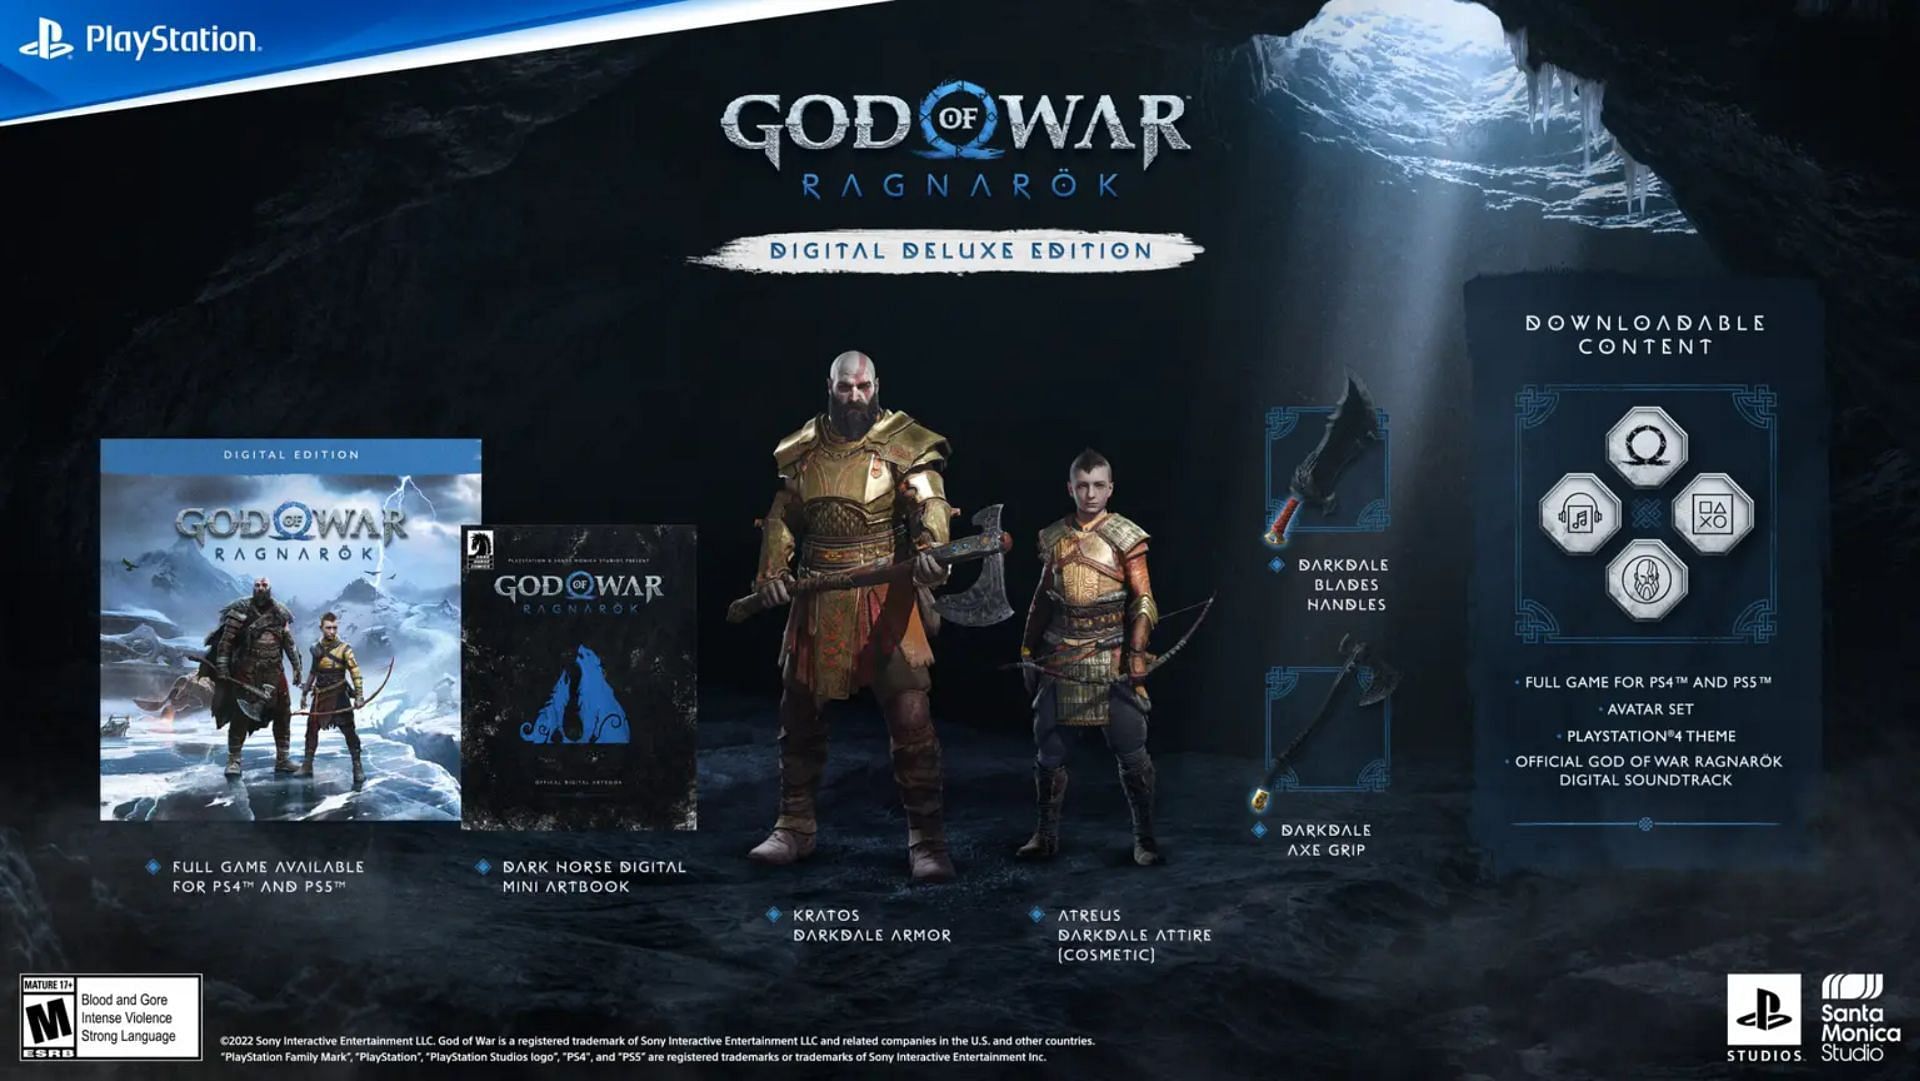 The Digital Deluxe Edition with all its contents (Image via PlayStation)